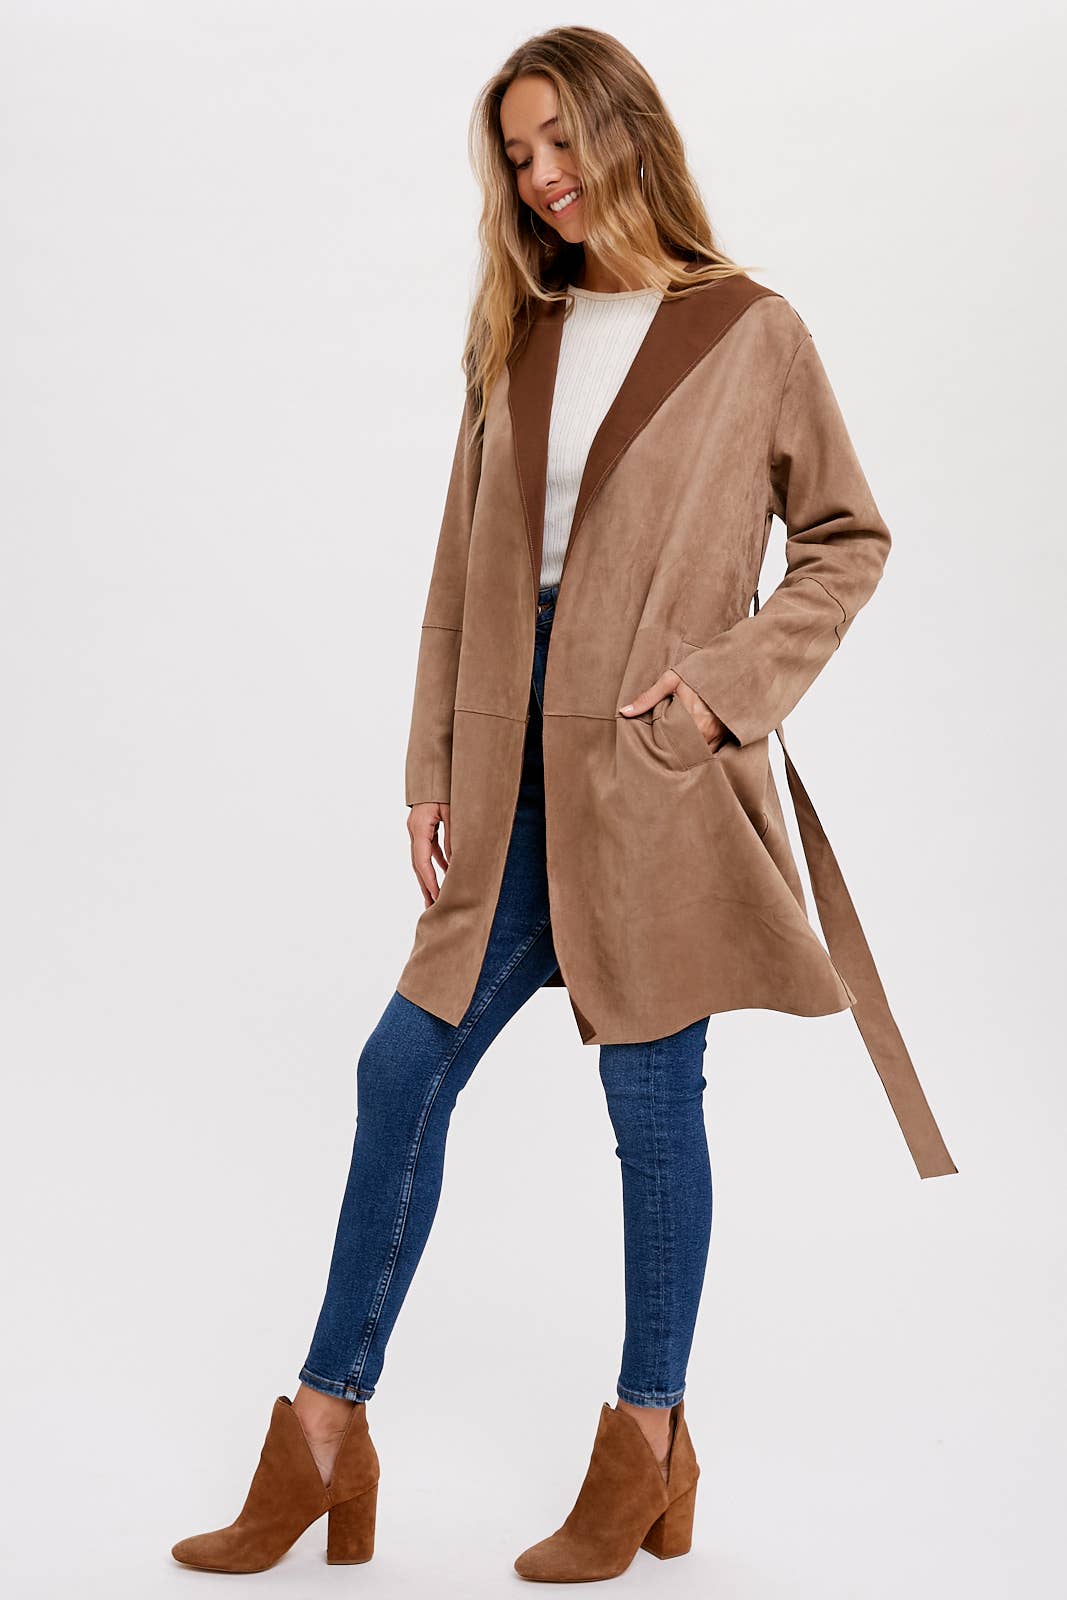 Suede-like Hooded Jacket in Coco